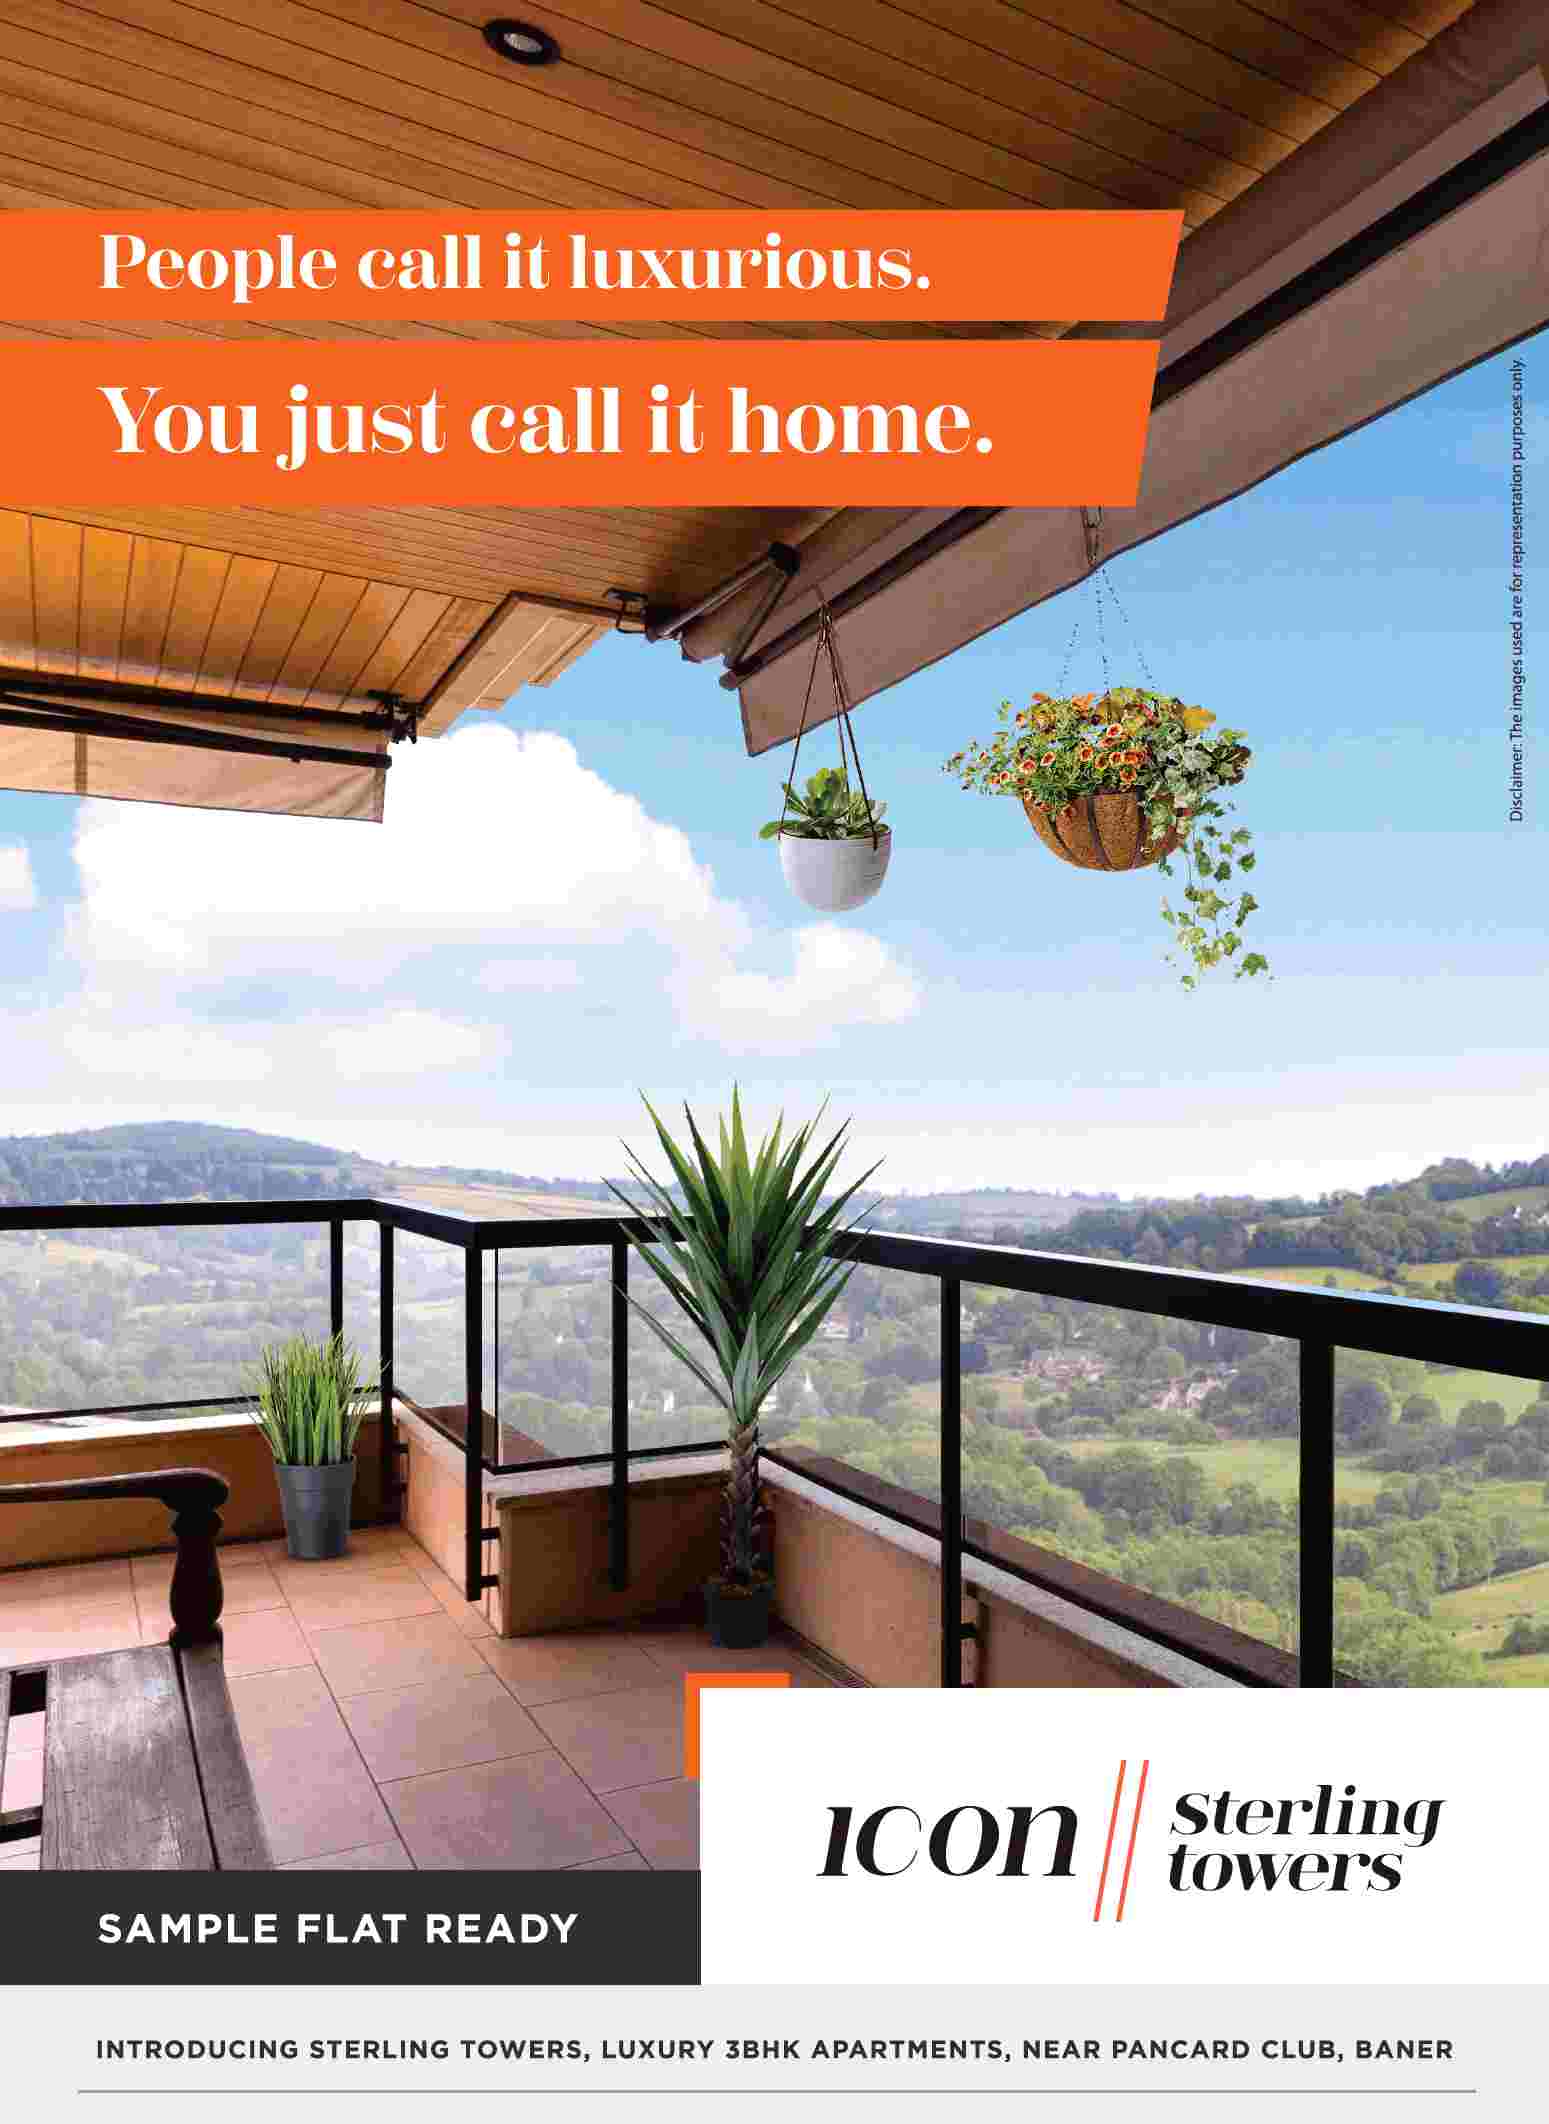 Sample flat is ready for visit at Icon Sterling Towers in Pune